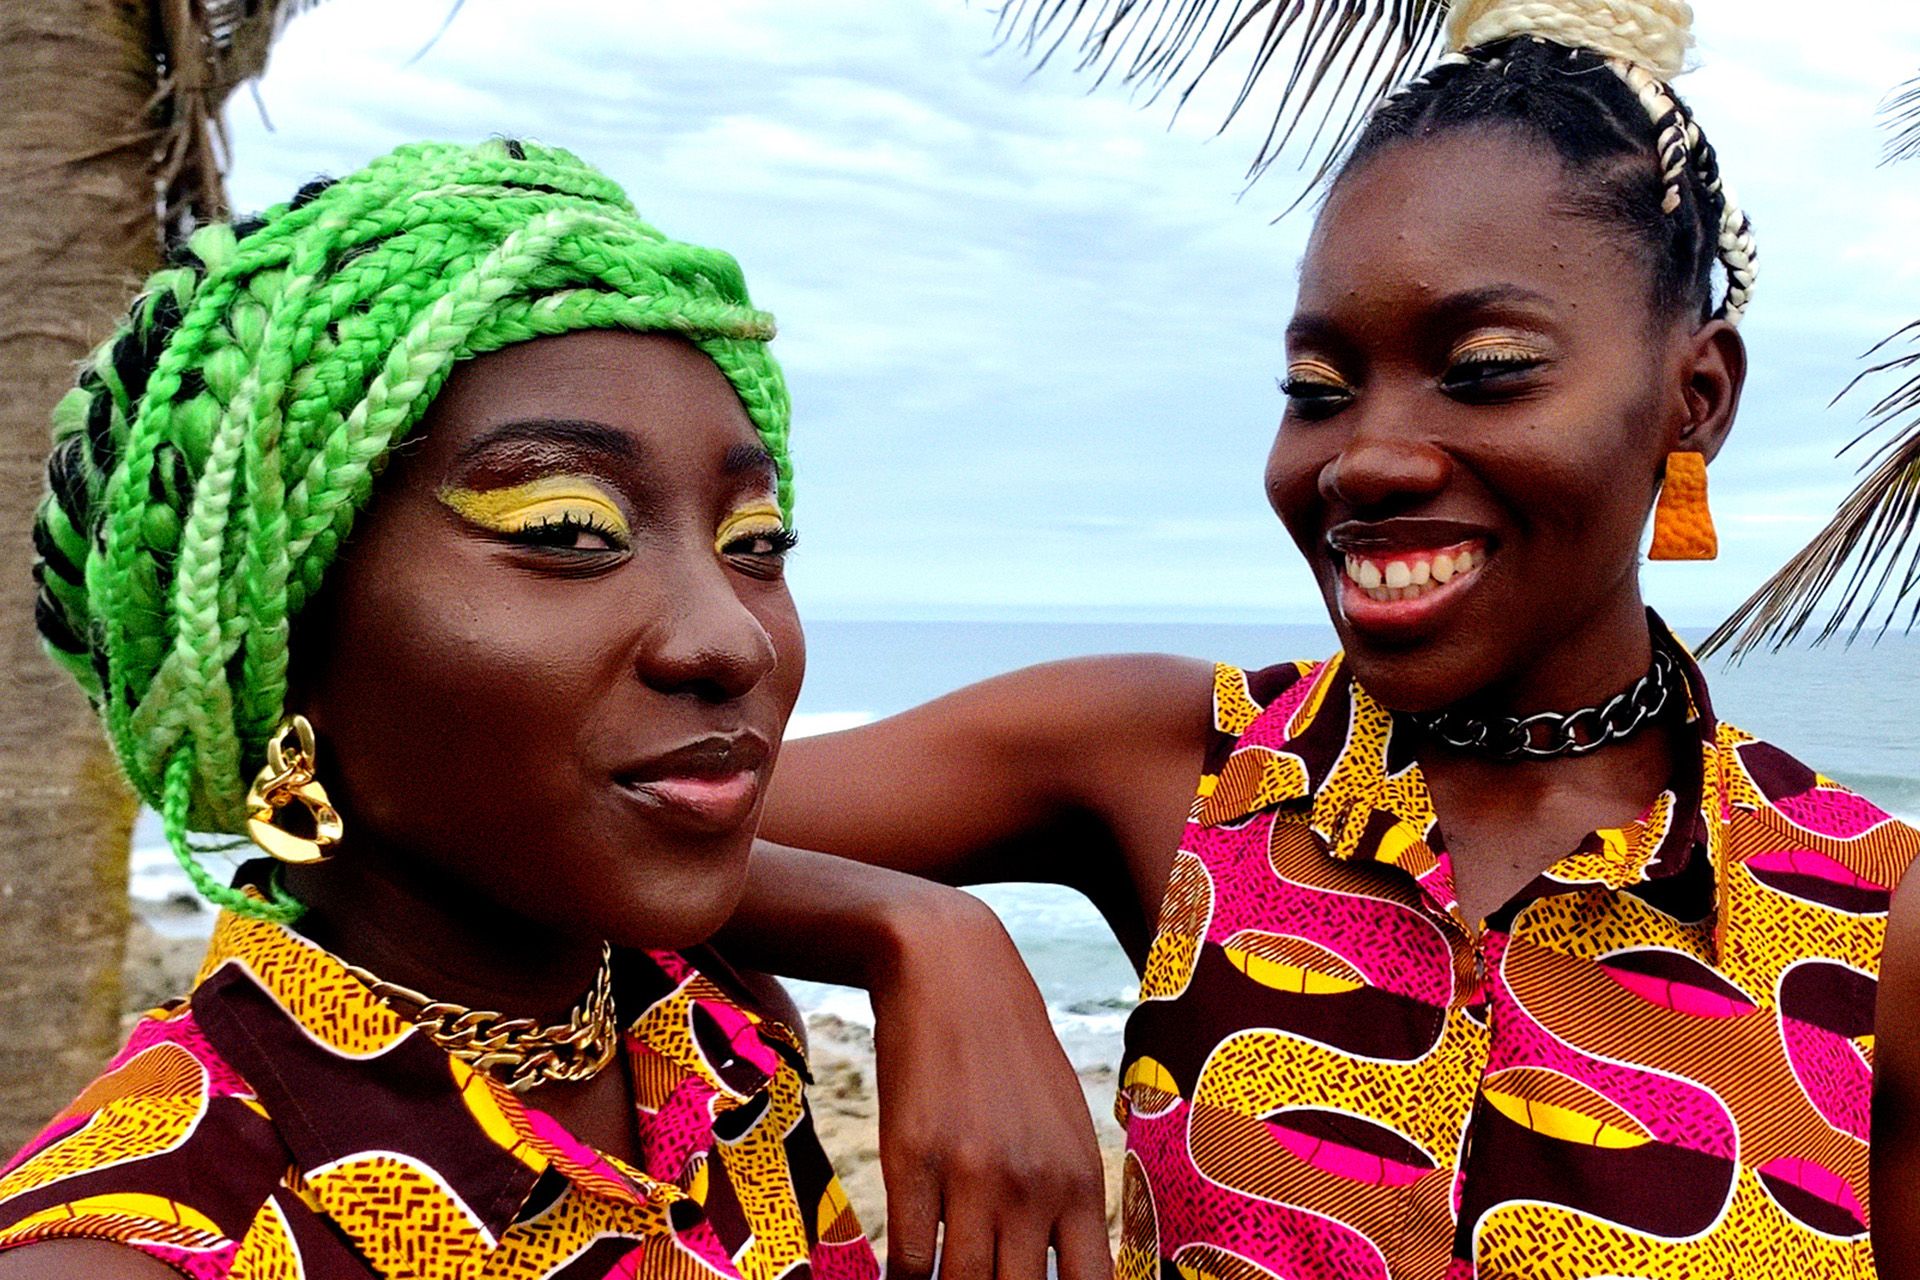 Two women in brightly colored clothes infront of a palm tree